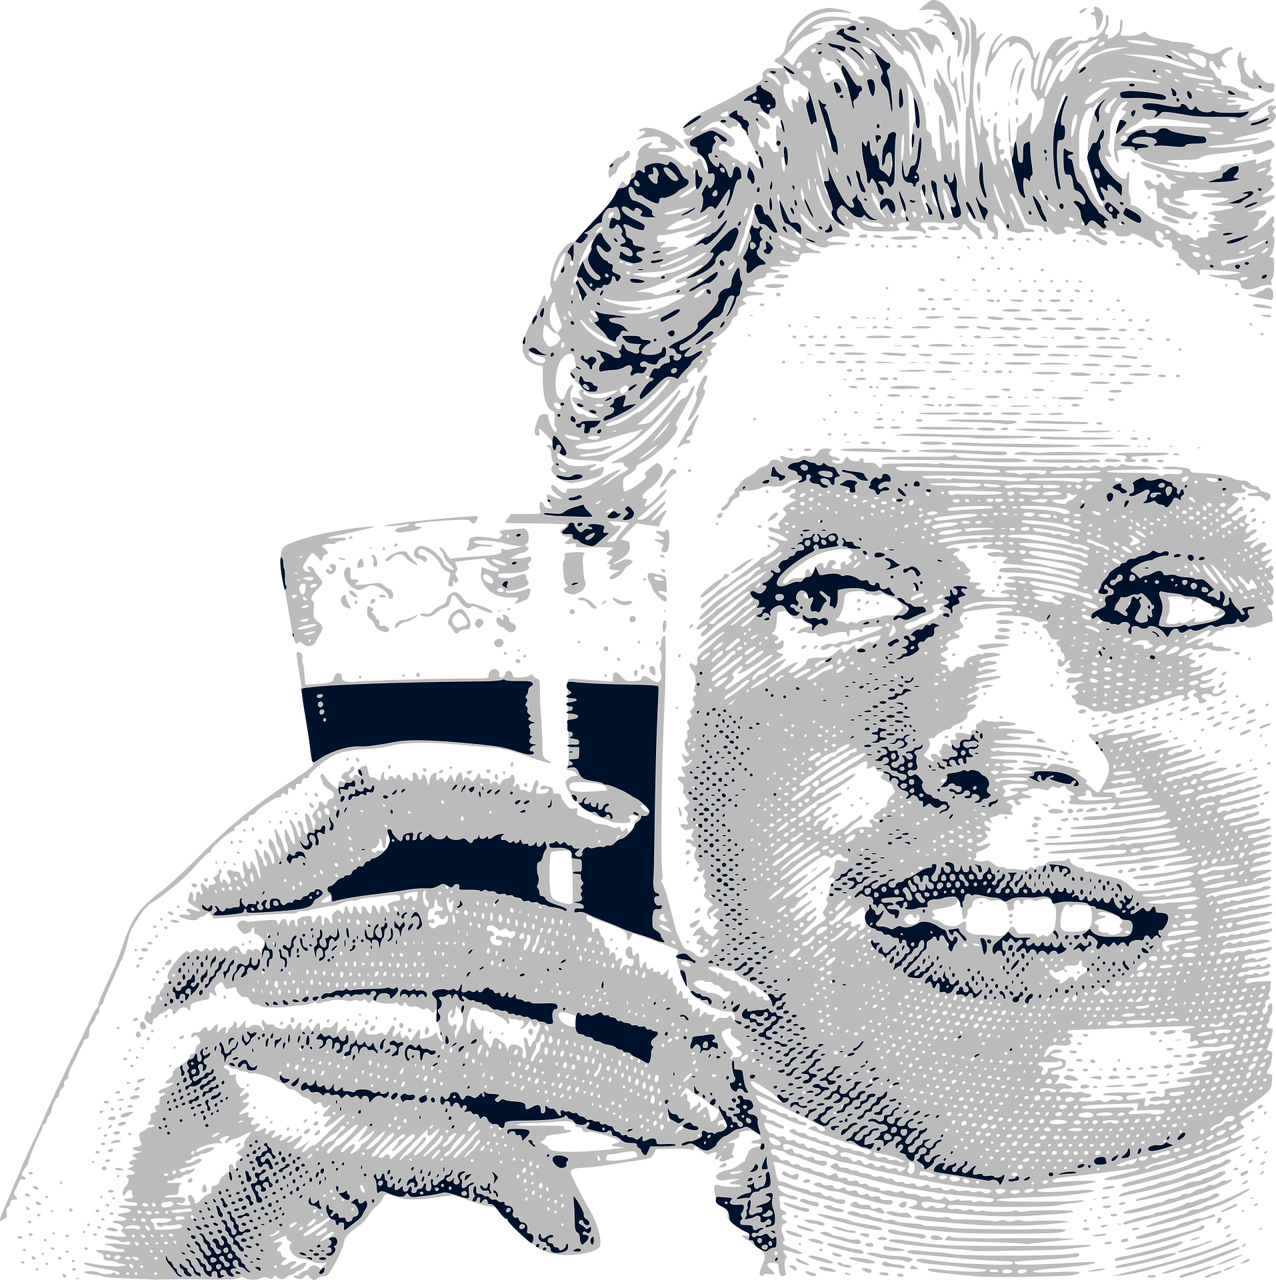 a close up of a person holding a cell phone, a digital rendering, inspired by Don Eddy, reddit, ascii art, man drinking beer, baron harkonnen, mid shot photo, portrait. high detail